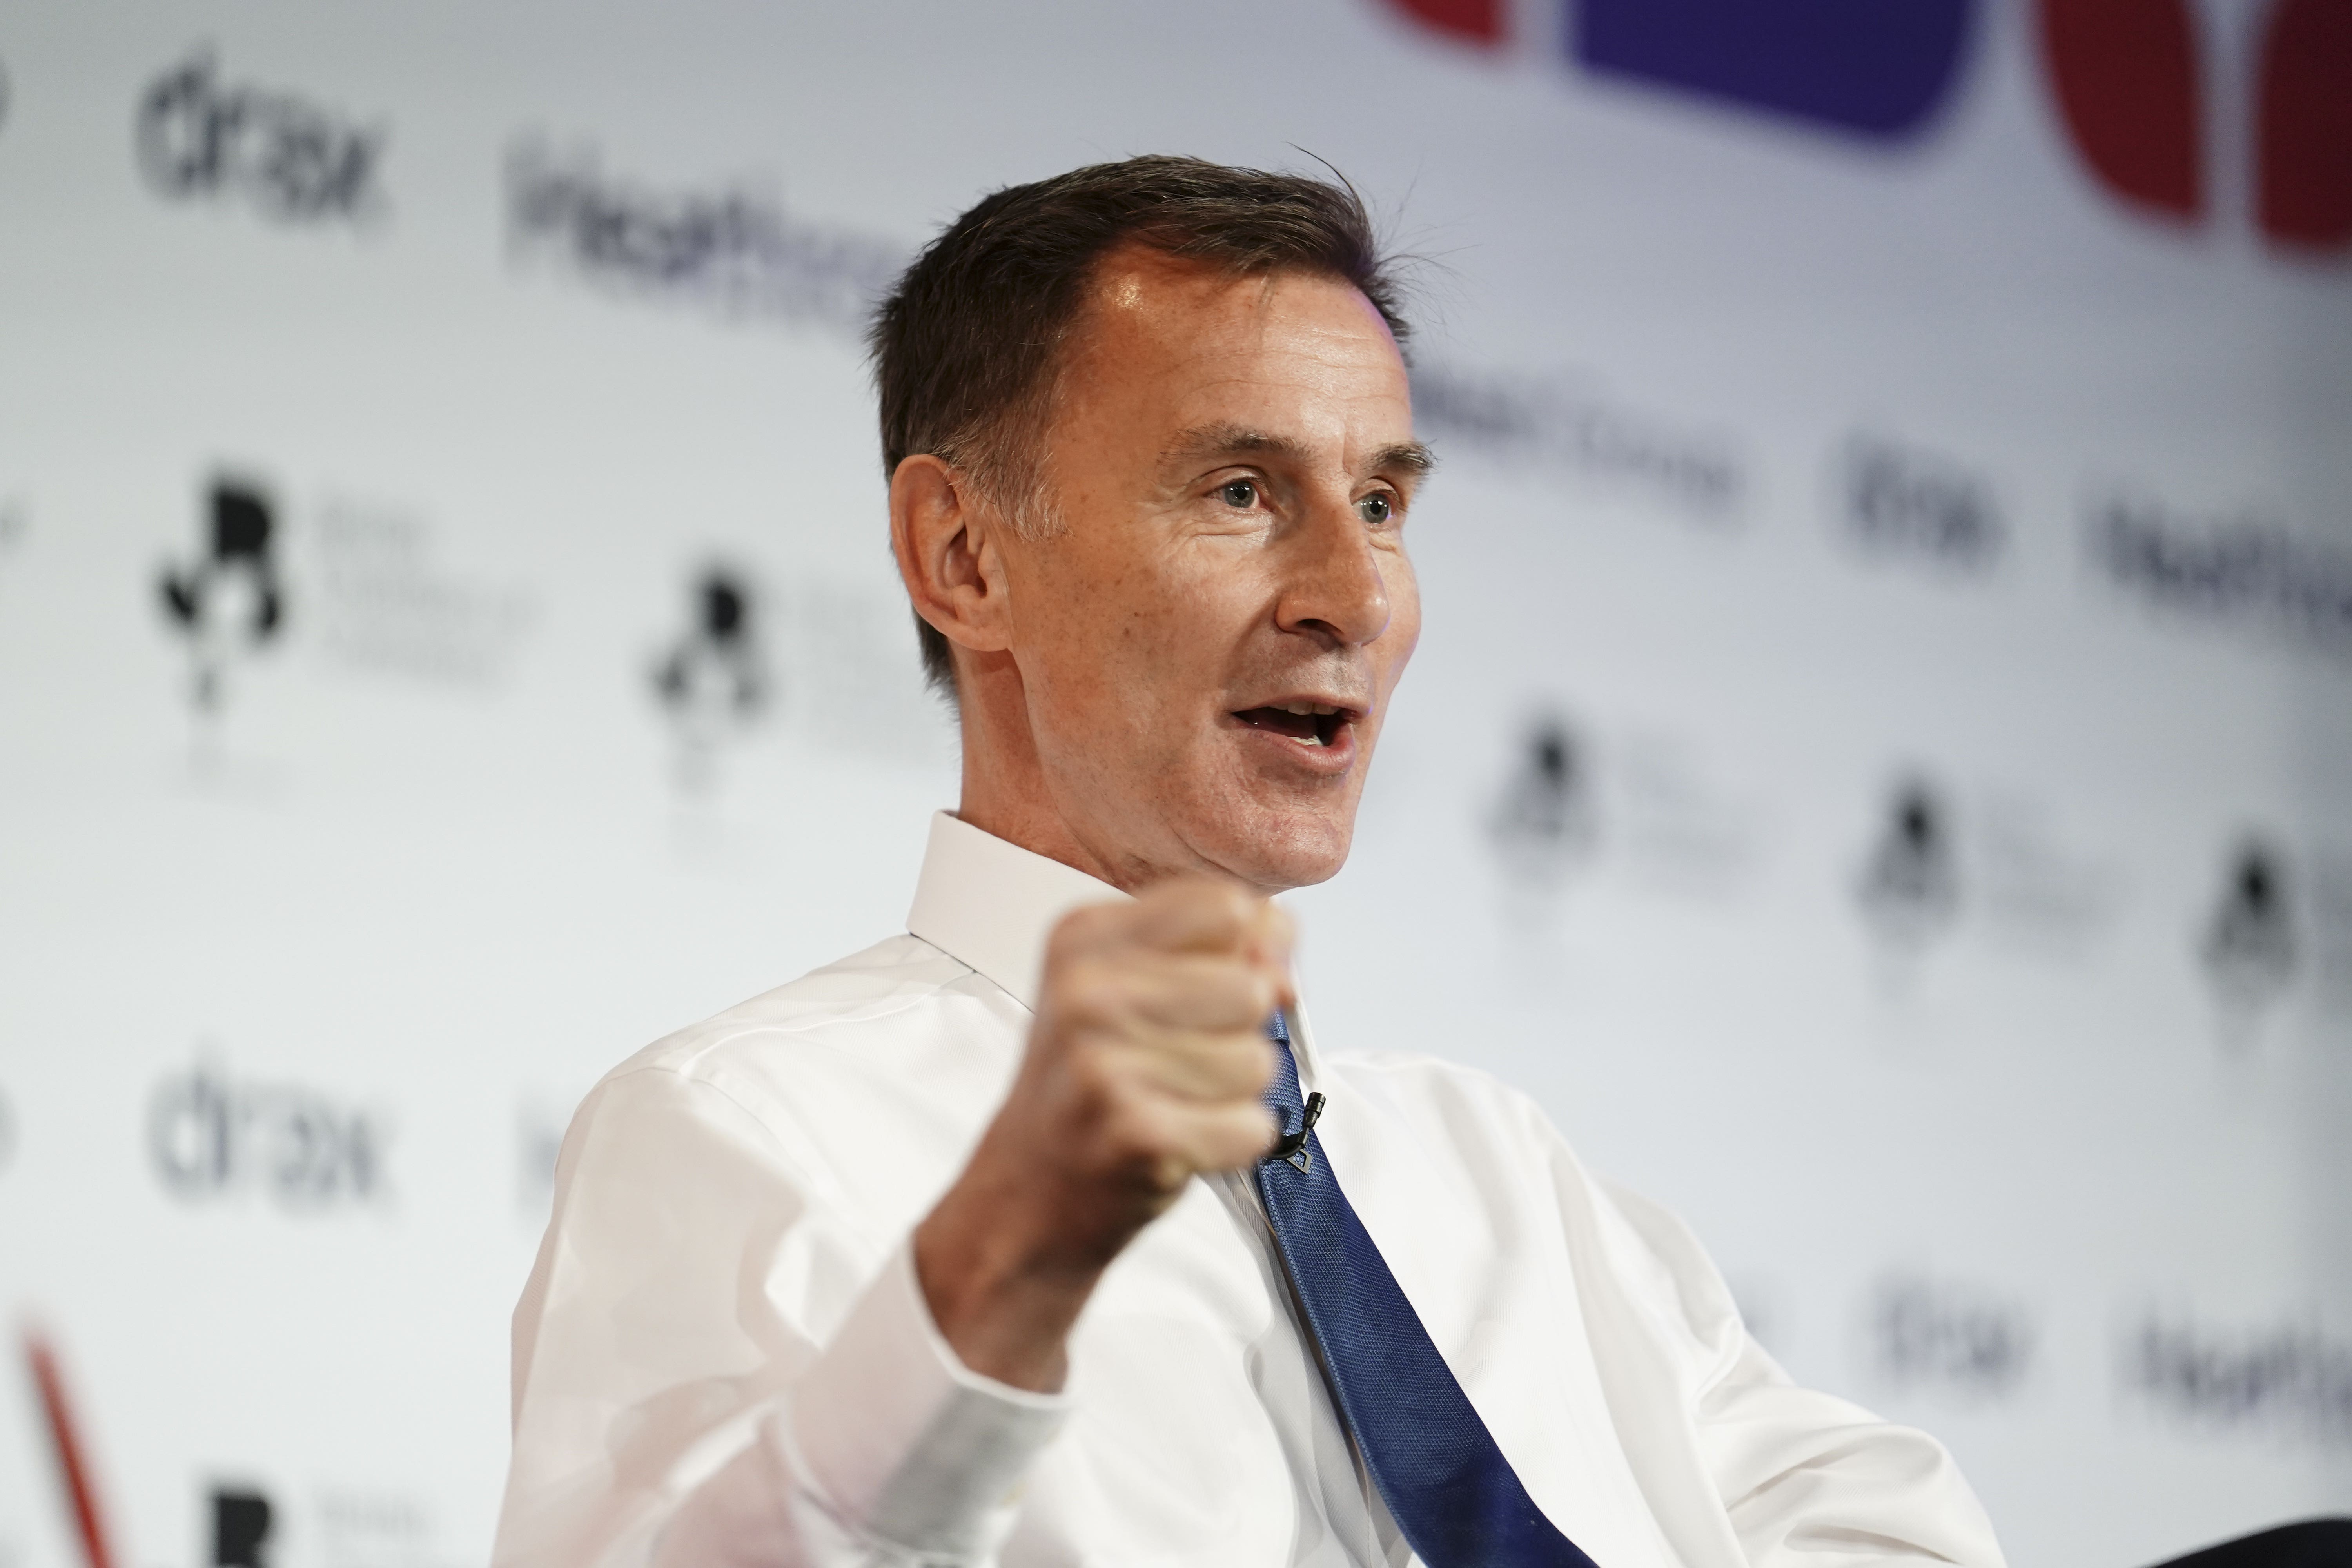 Chancellor Jeremy Hunt welcomed the forecast in the IMF report